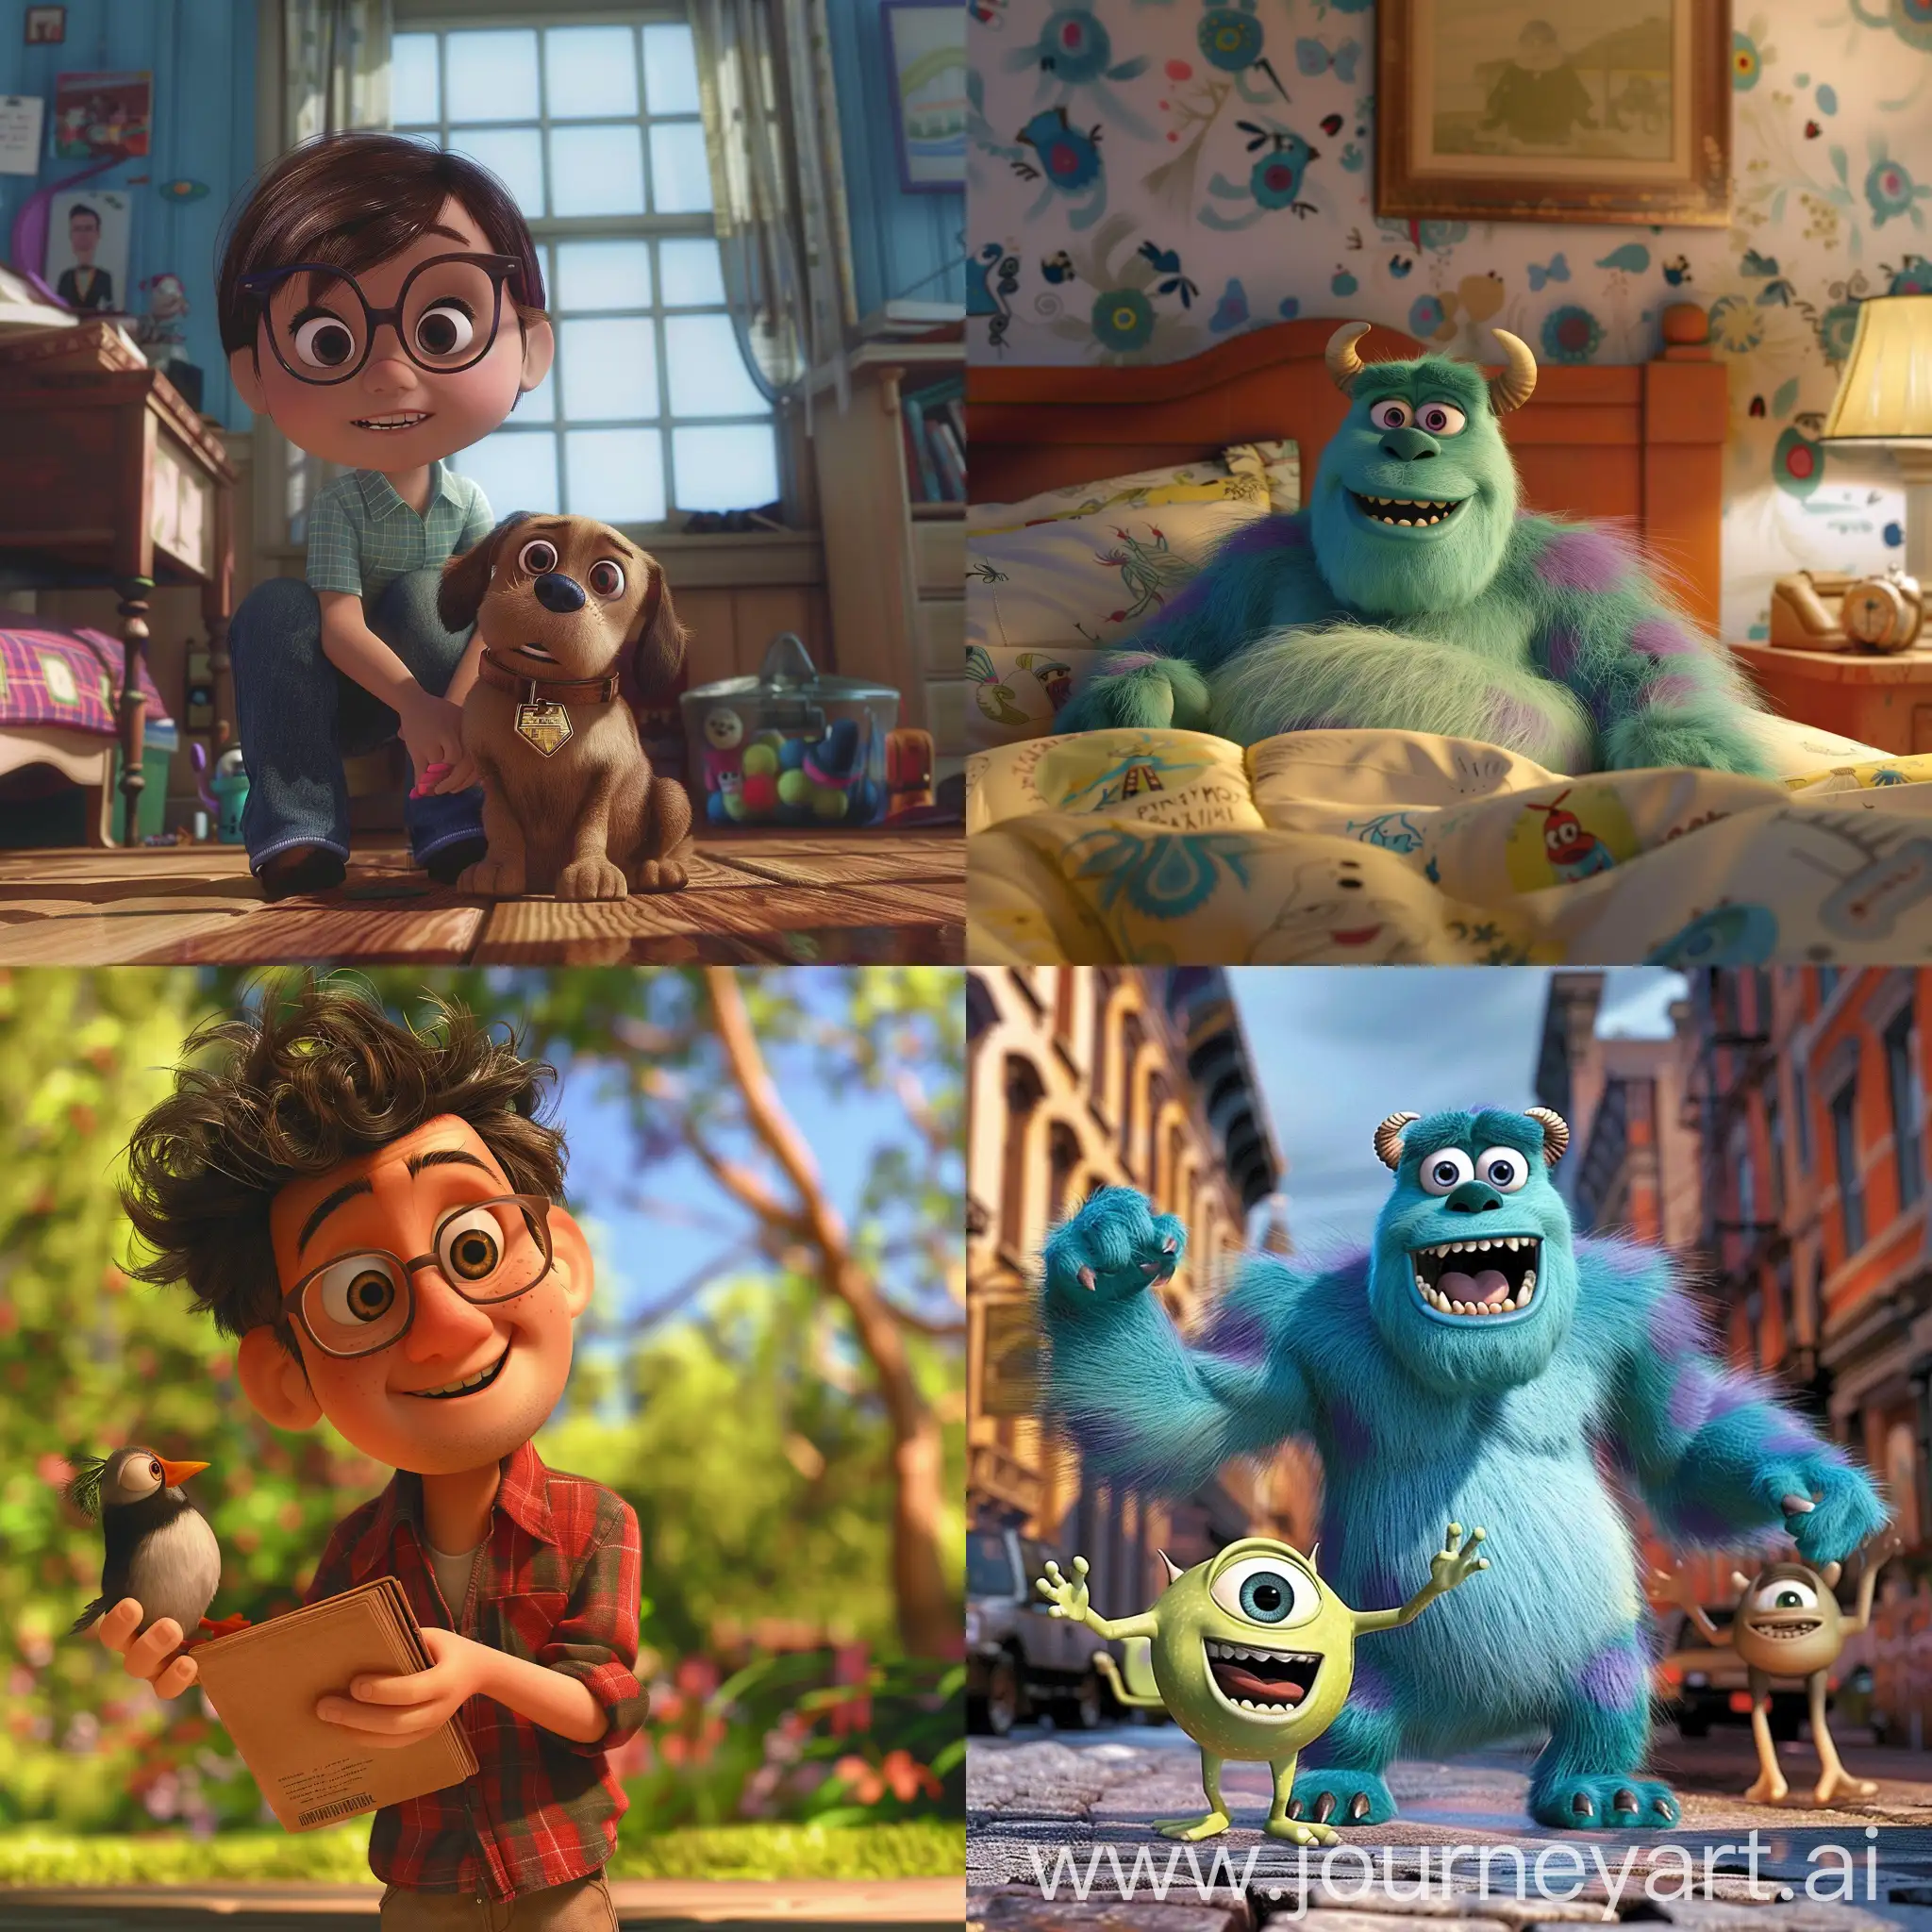 Disney-Pixar-Animation-Playful-Characters-in-Colorful-Adventure